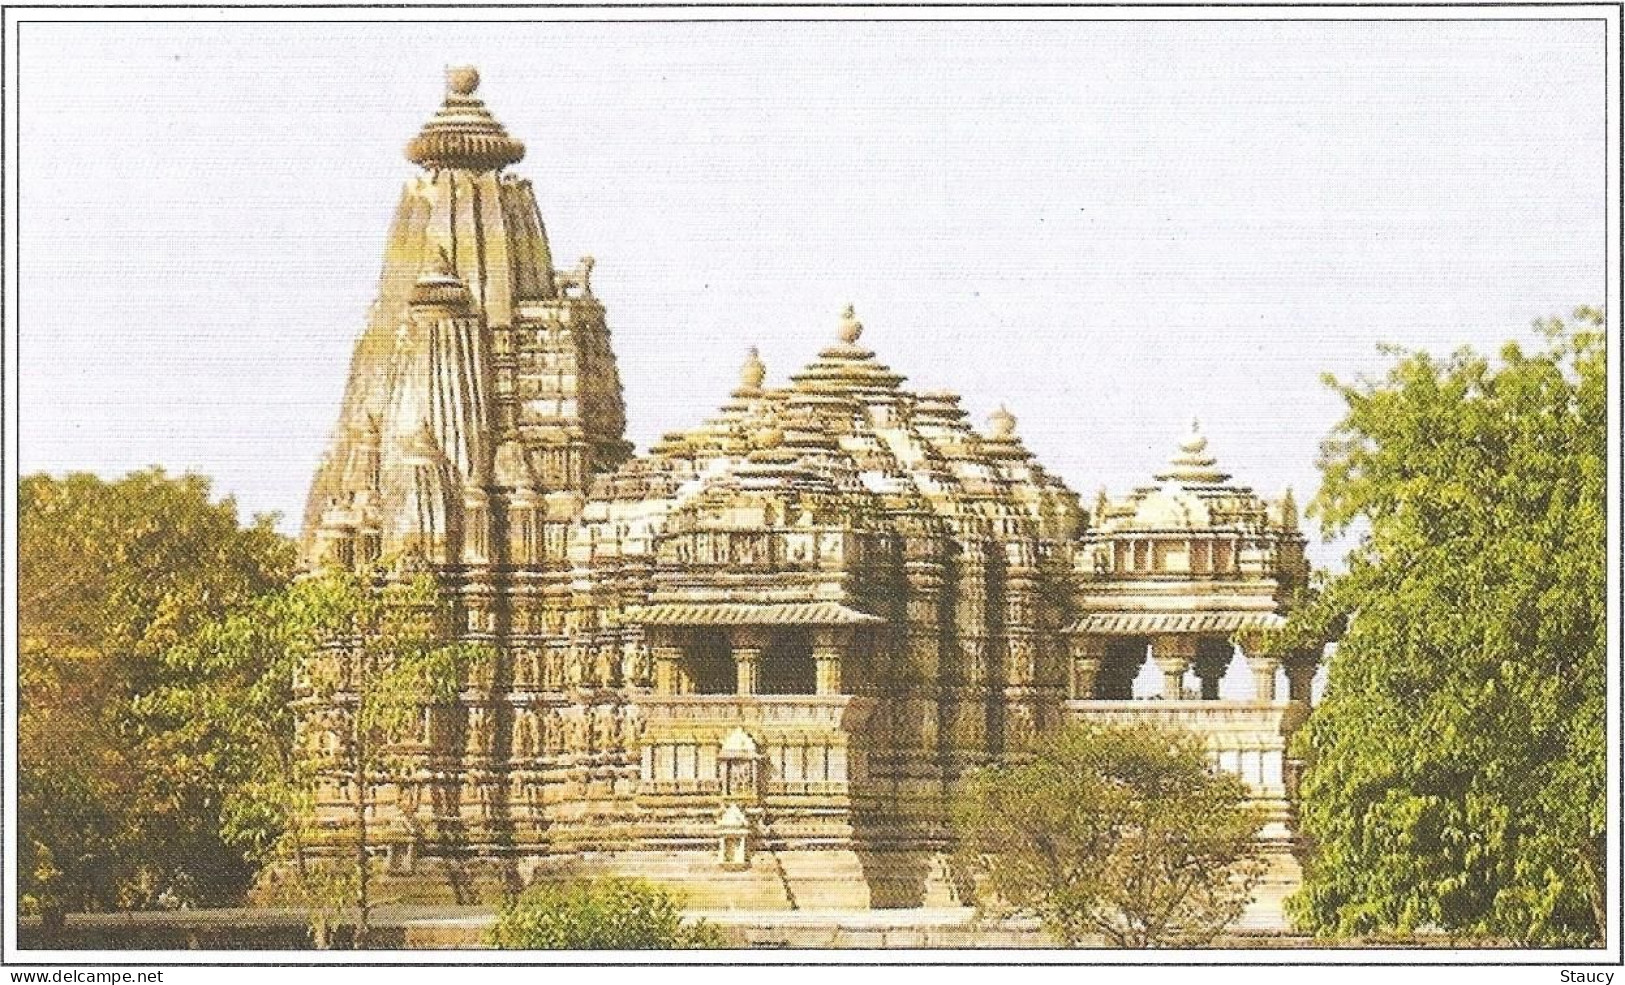 India Khajuraho Temples MONUMENTS - CHITRAGUPTA's SUN Temple Picture Post CARD New As Per Scan - Ethniques, Cultures